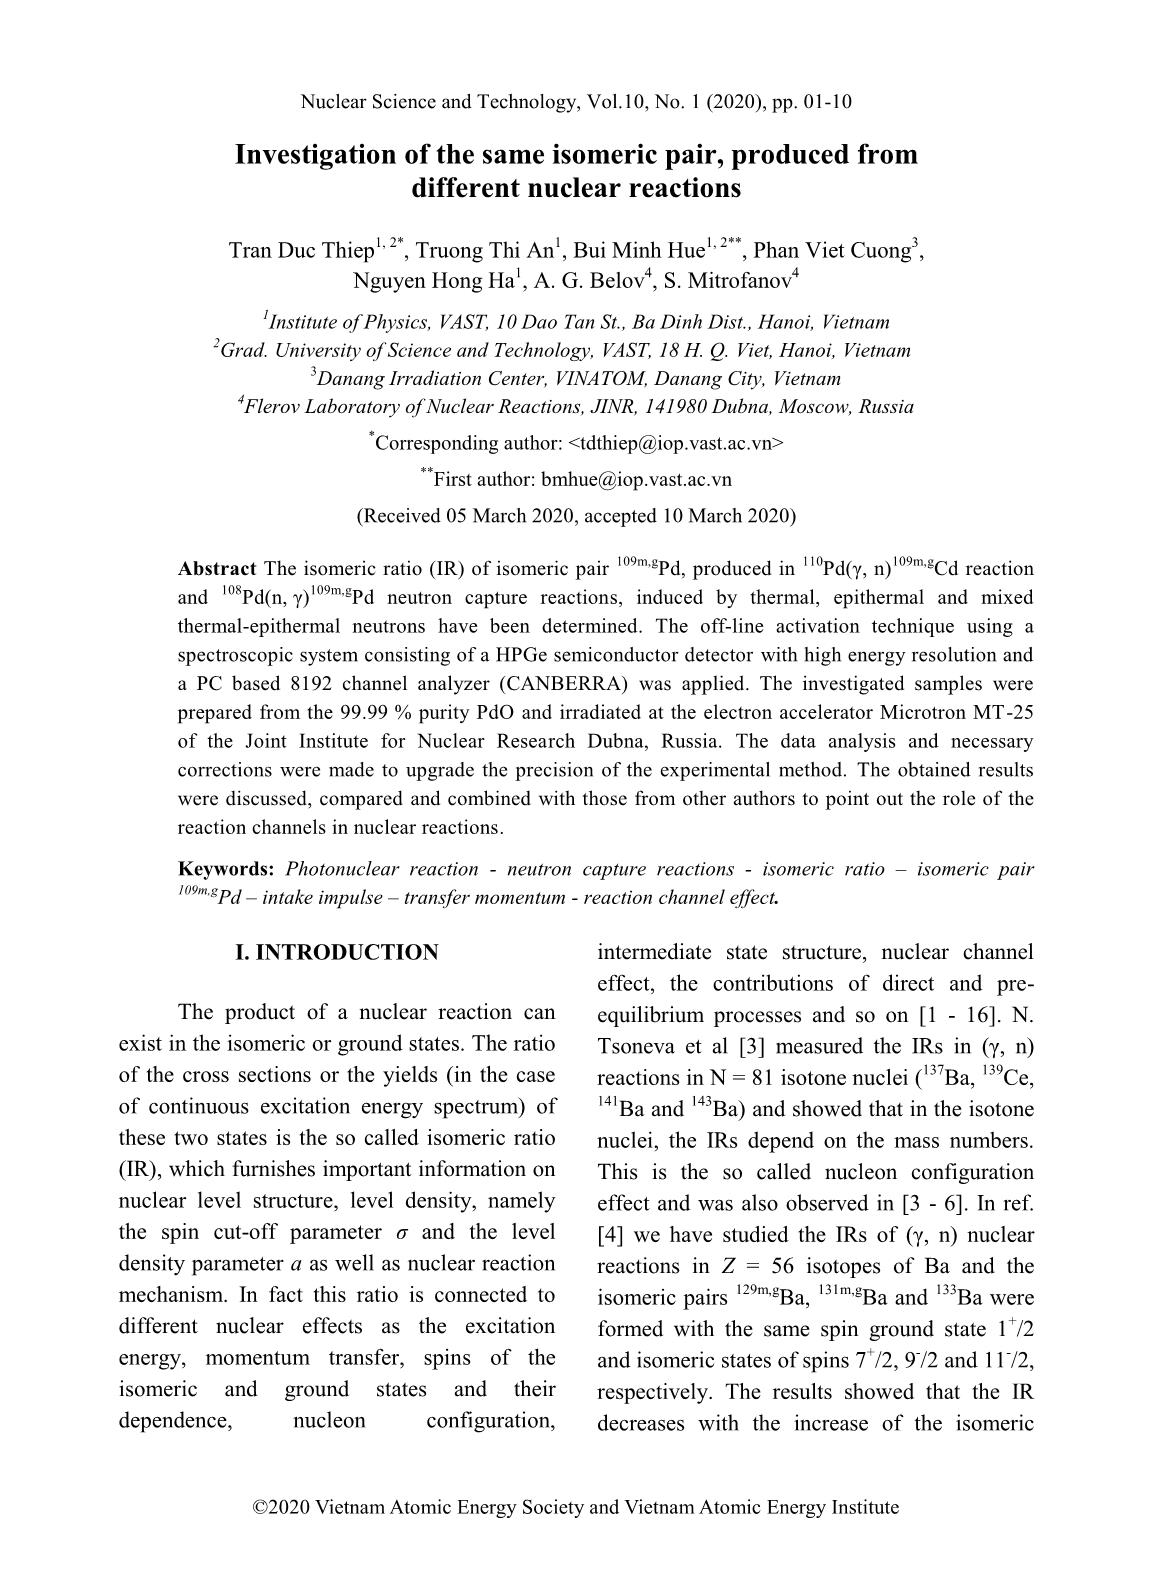 Nuclear Science and Technology - Volume 10, Number 1, March 2020 trang 4